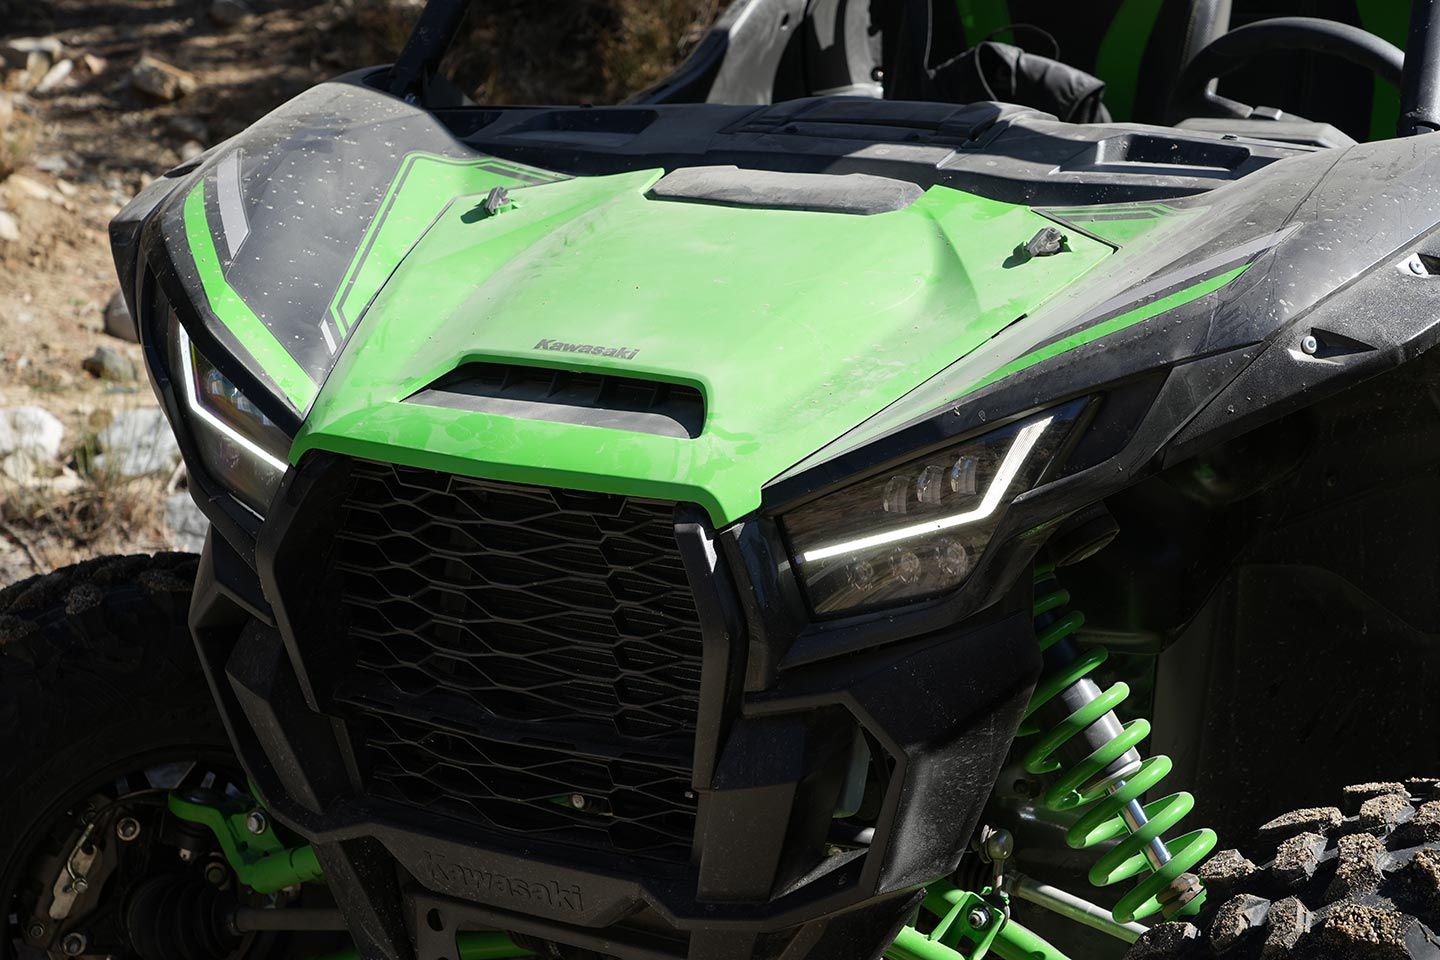 The 2023 Teryx KRX 1000 has pleasing lines. Driver’s will appreciate the low hood which makes it easy to peer out of, especially over uneven terrain.